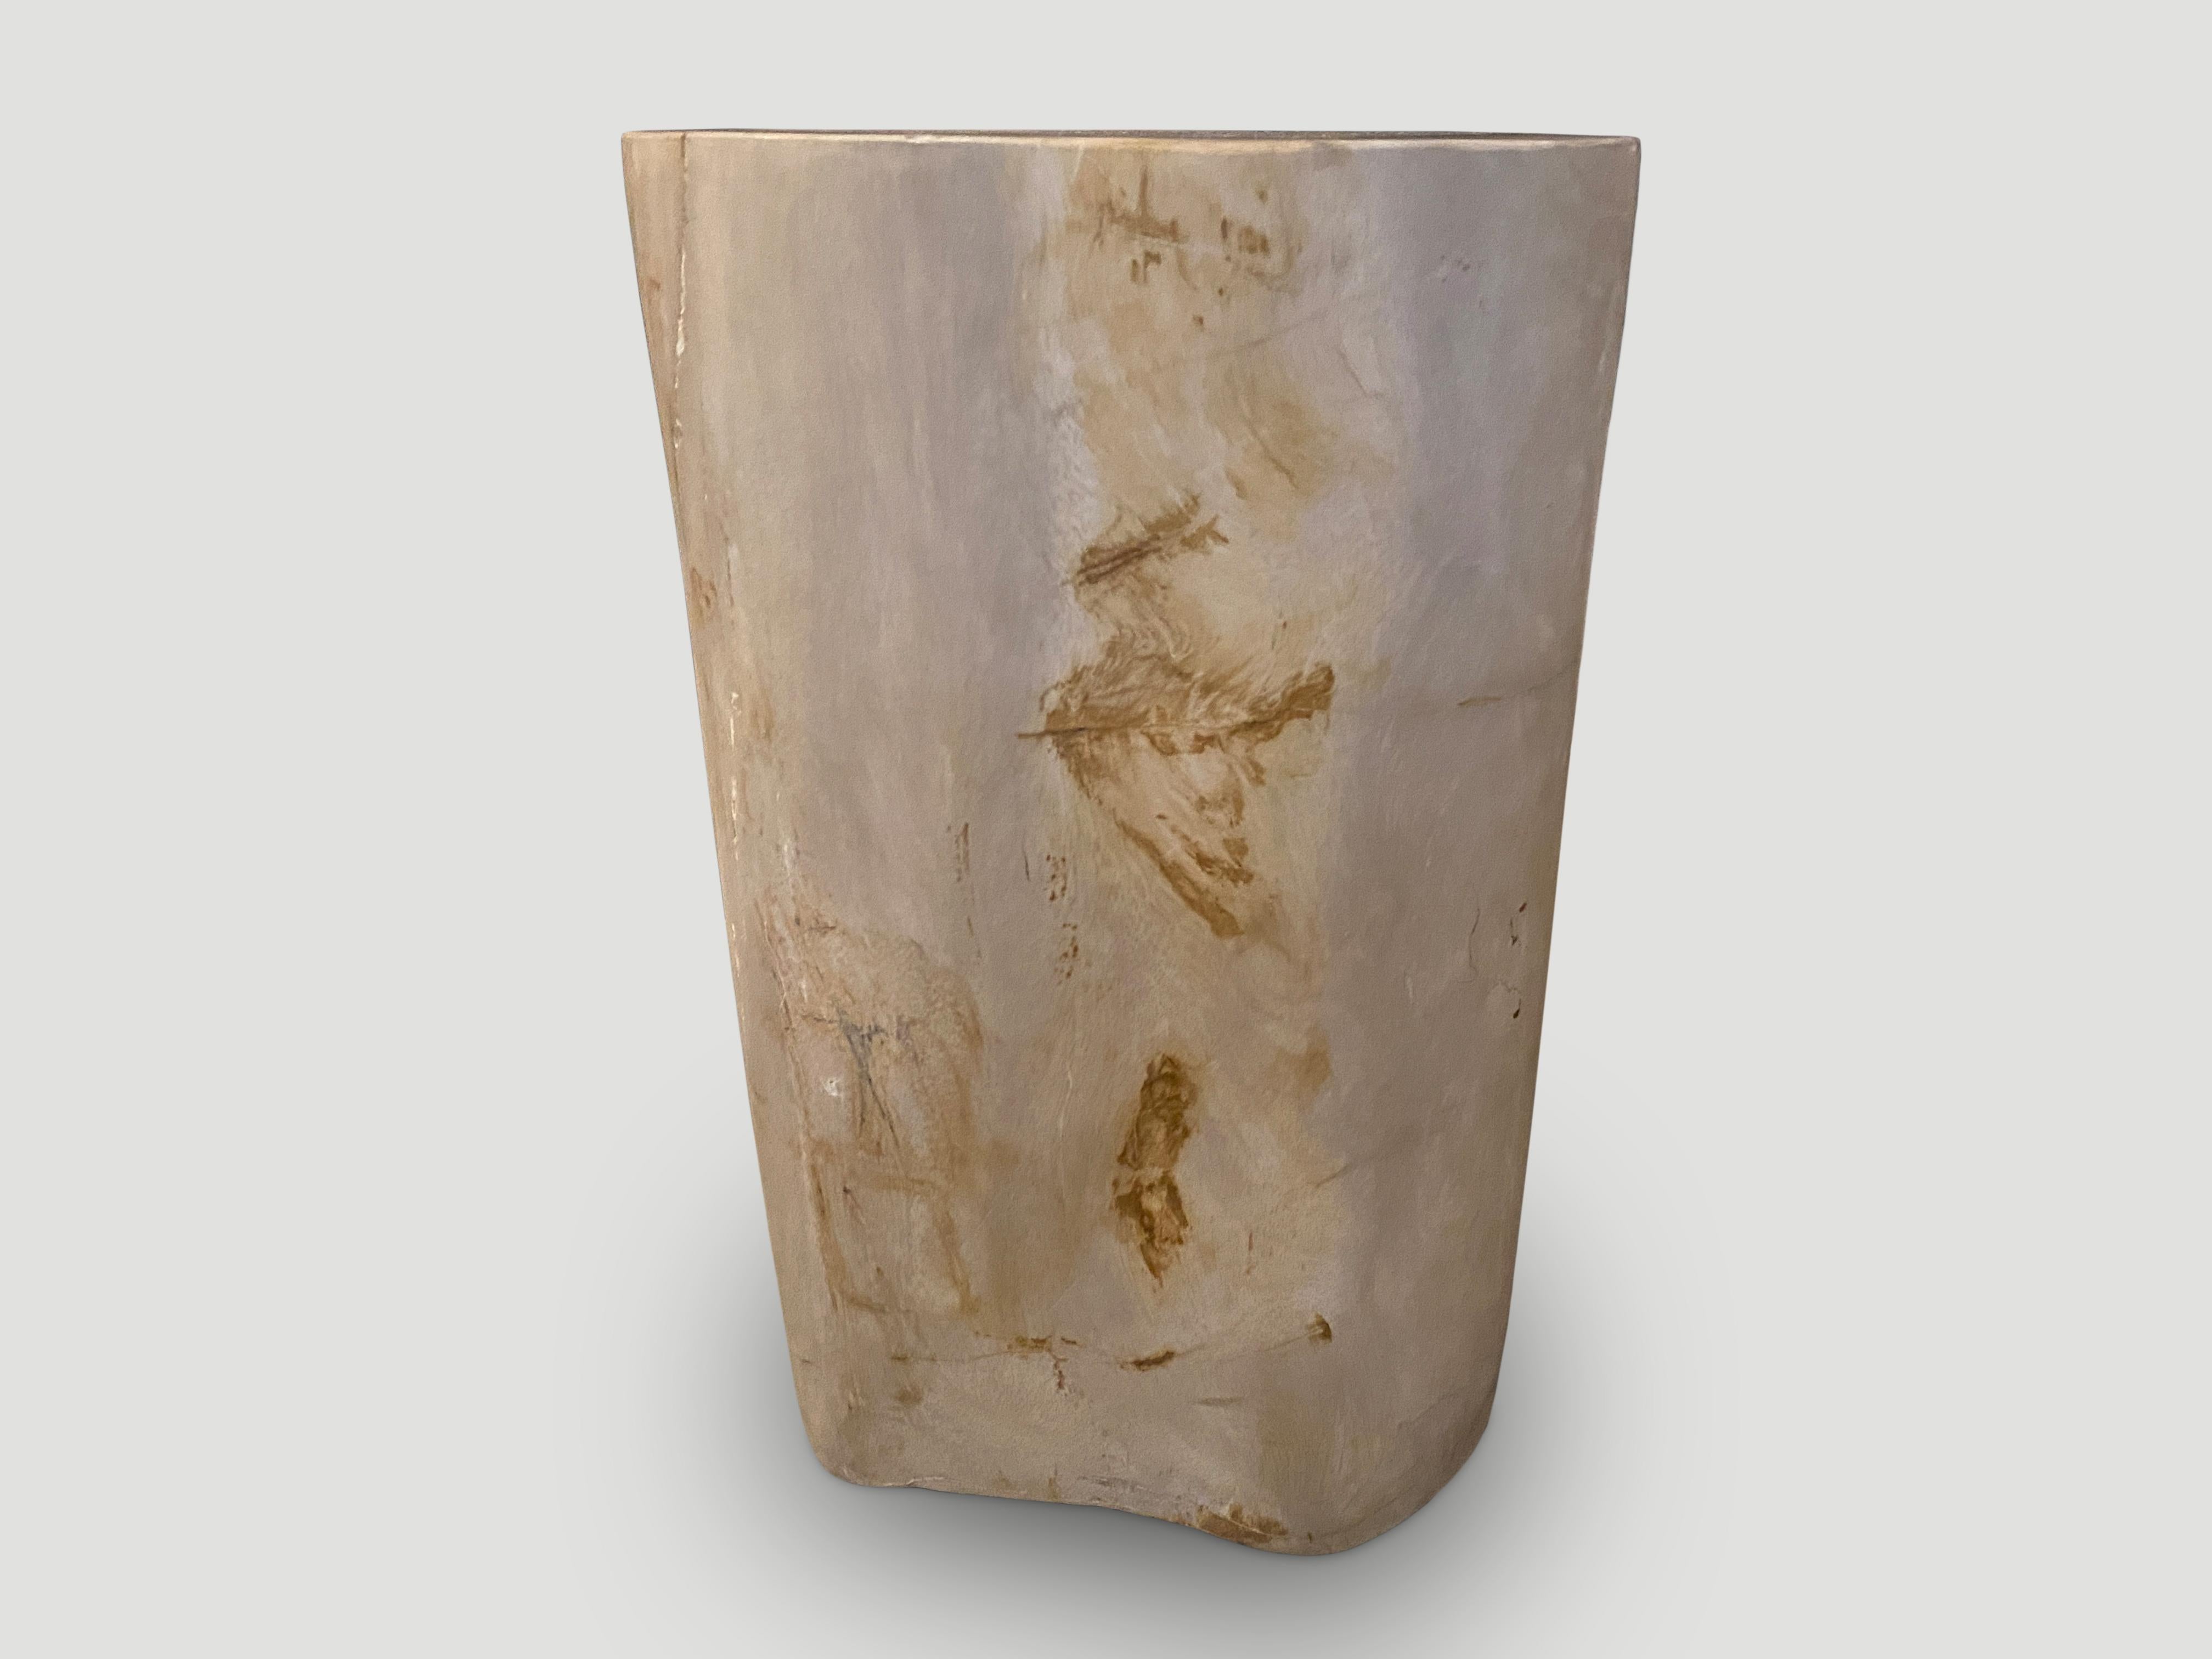 Impressive beautiful petrified wood side table. It’s fascinating how Mother Nature produces these stunning 40 million year old petrified teak logs with such contrasting colors and natural patterns throughout. Modern yet with so much history. The